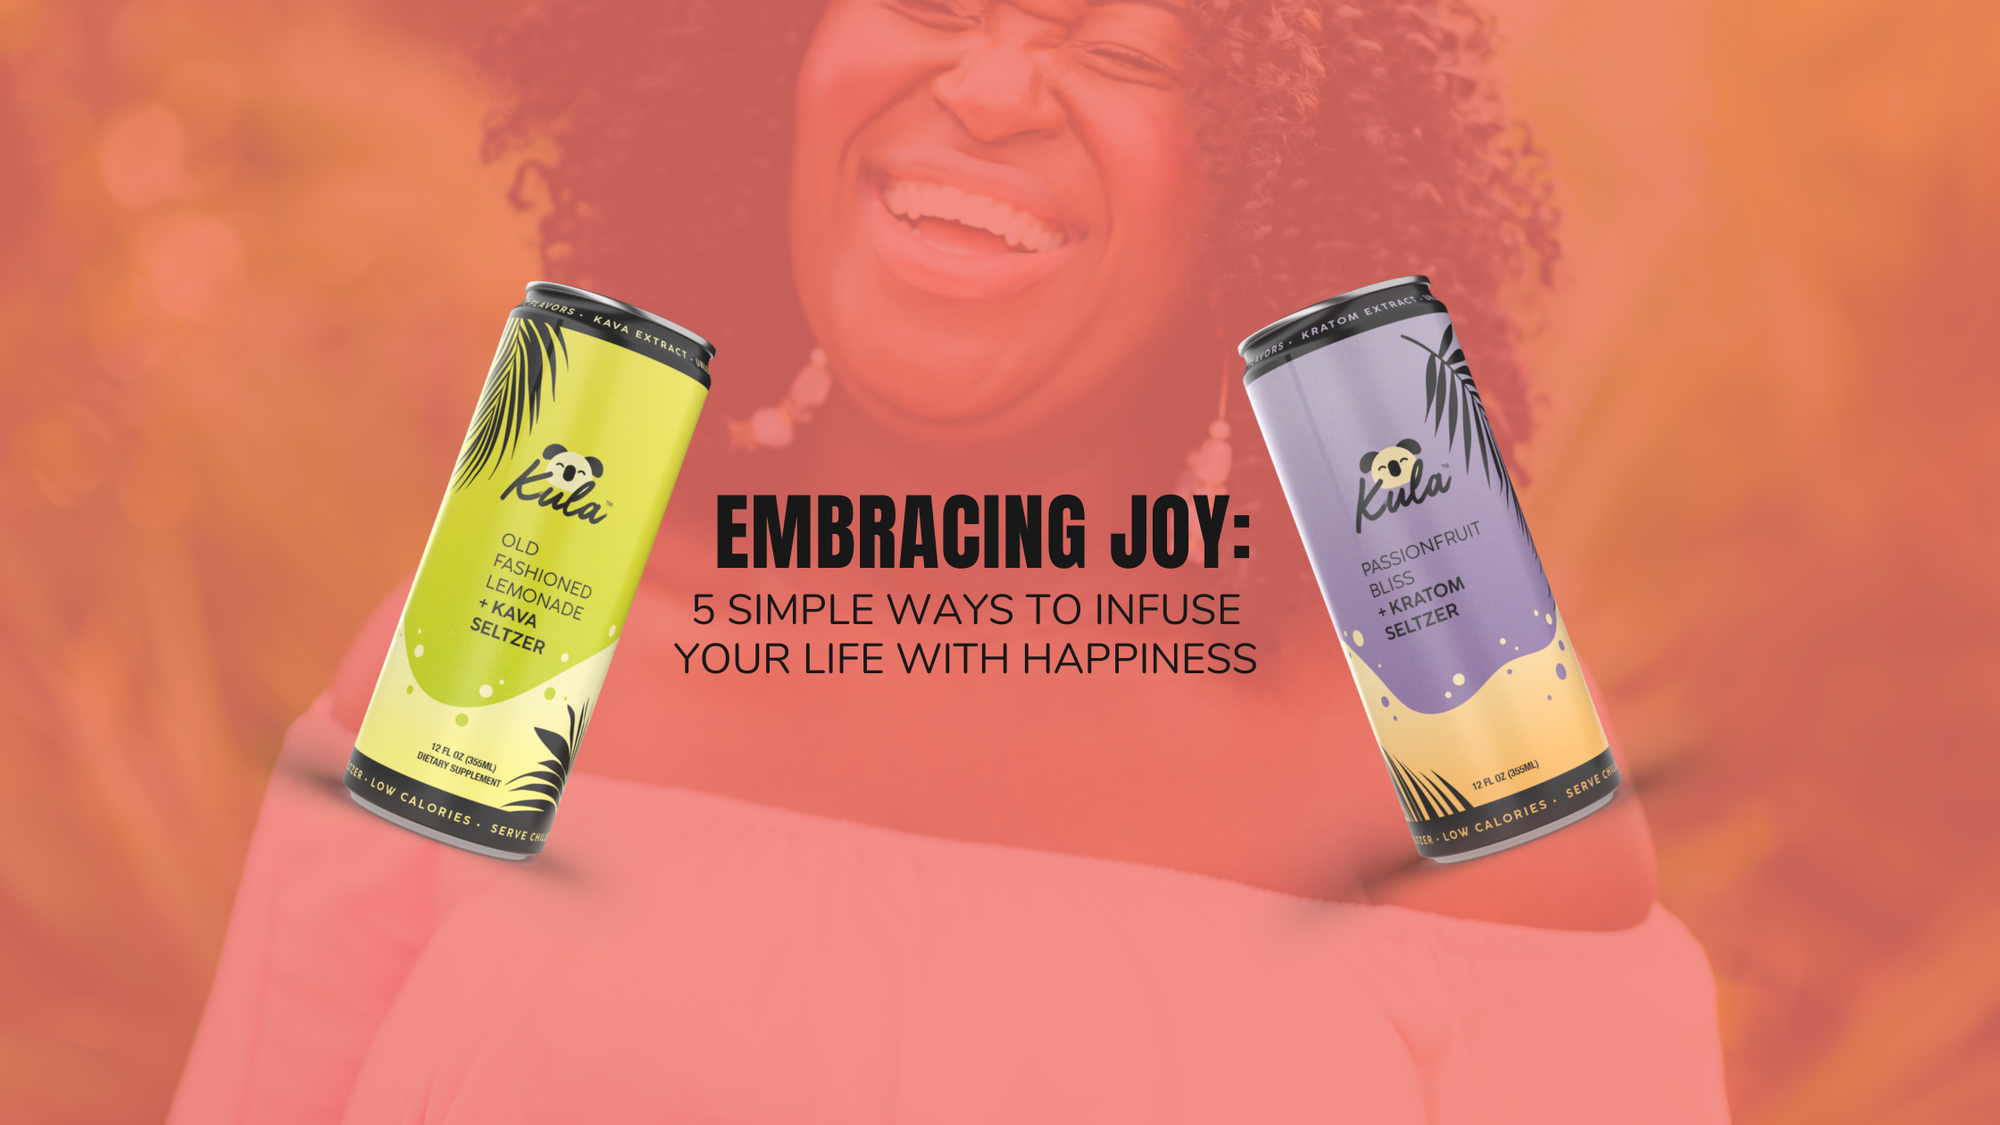 Embracing Joy: 5 Simple Ways to Infuse Your Life with Happiness